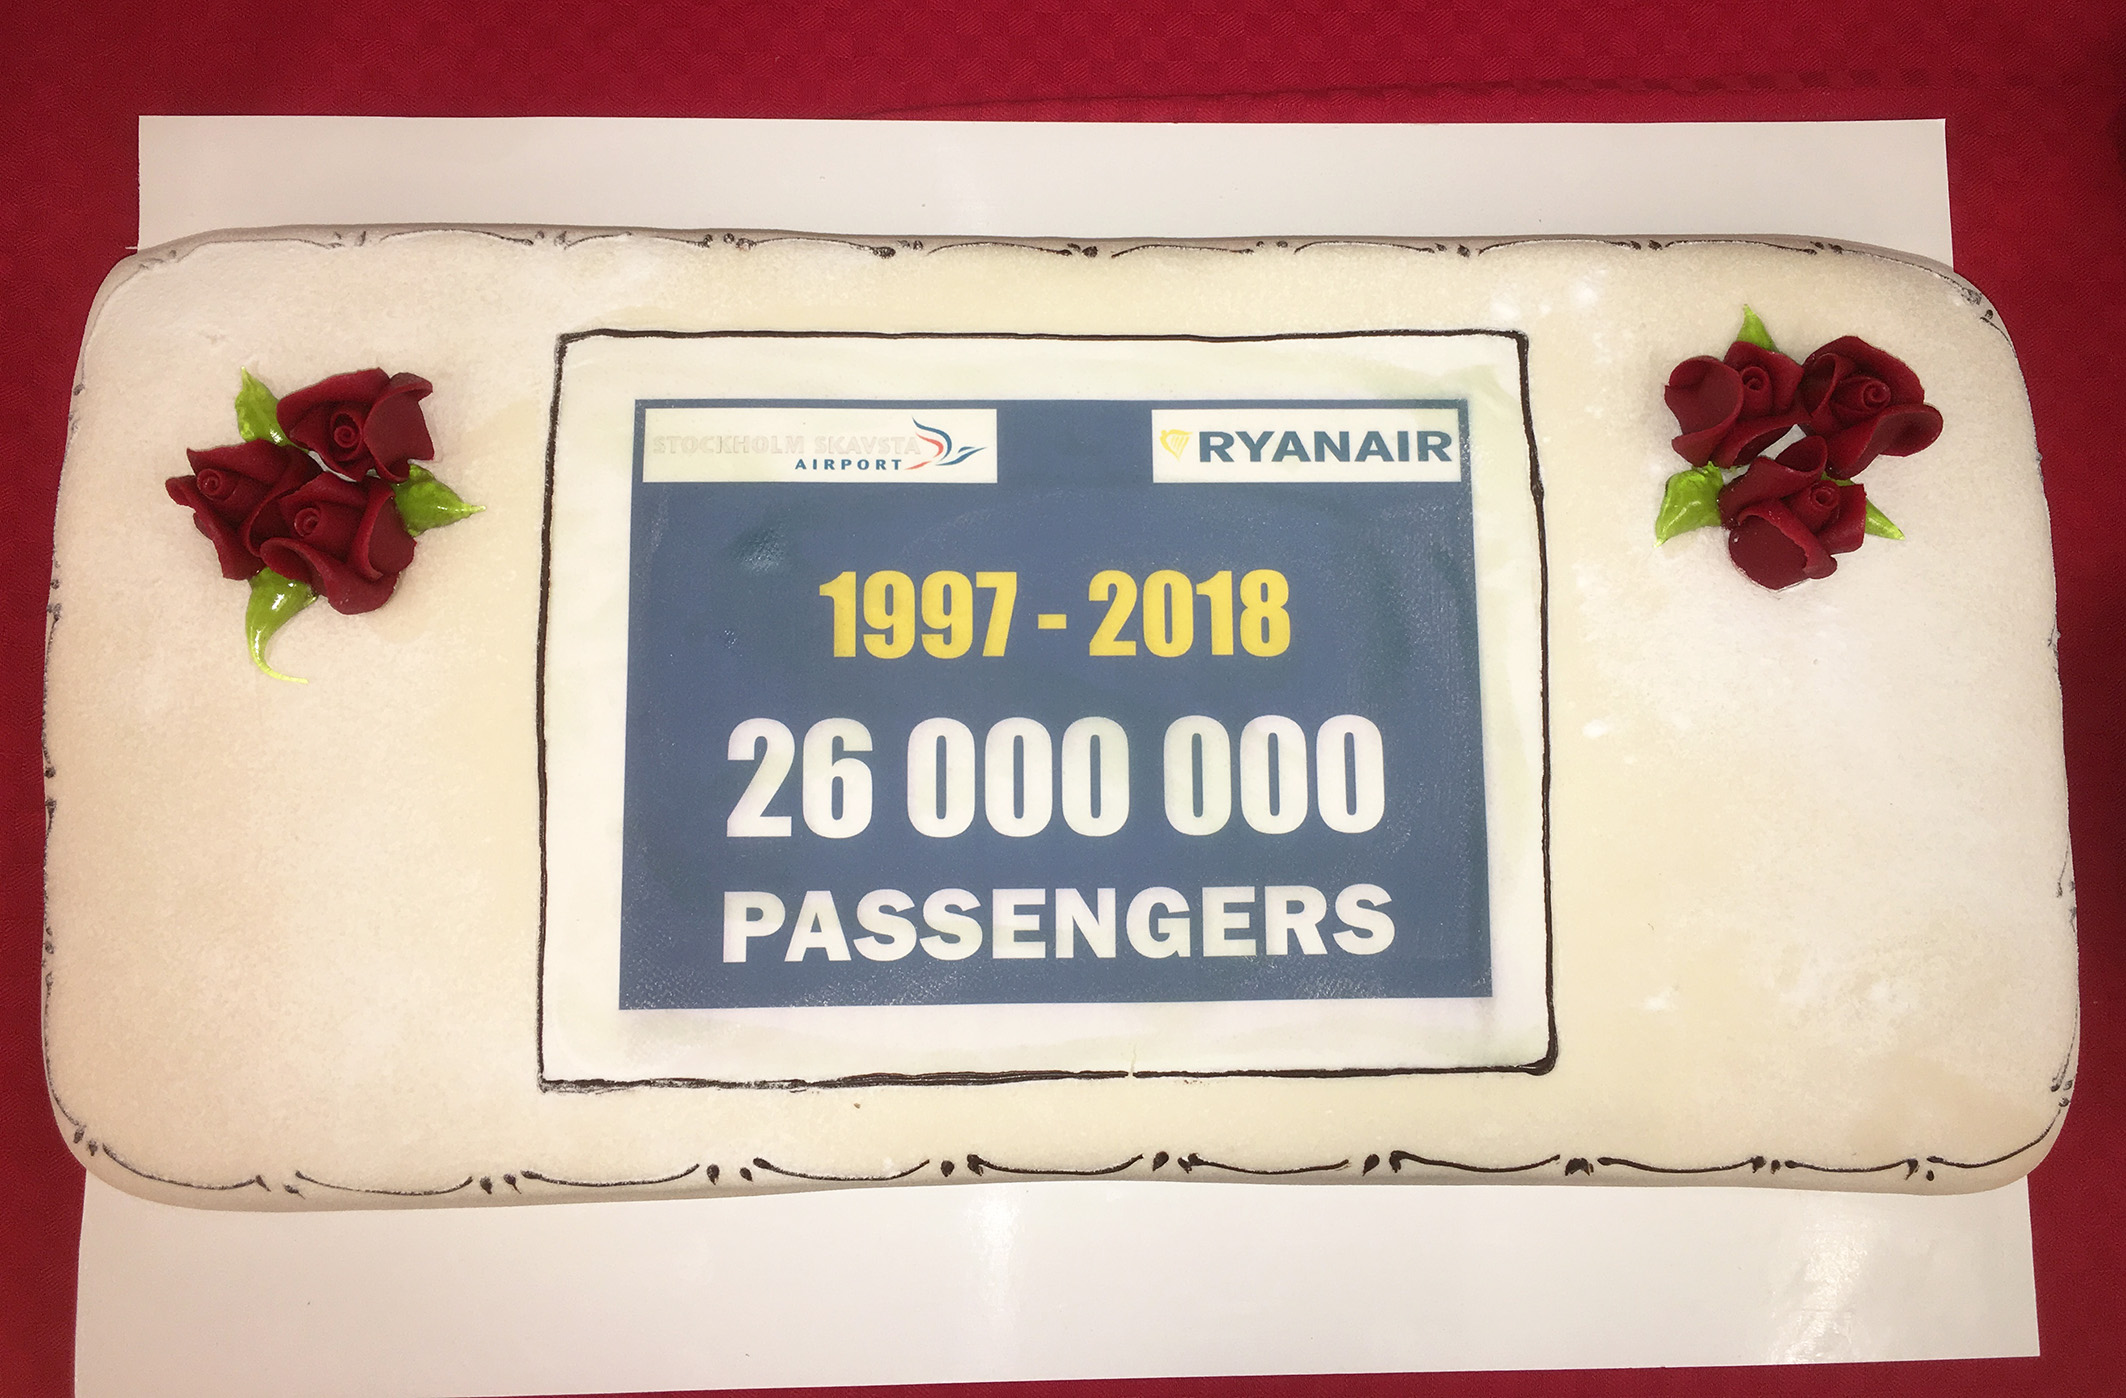 Ryanair Celebrates Carrying 26m Customers To/From Stockholm-Skavsta With Massive 95 Sek Seat Sale